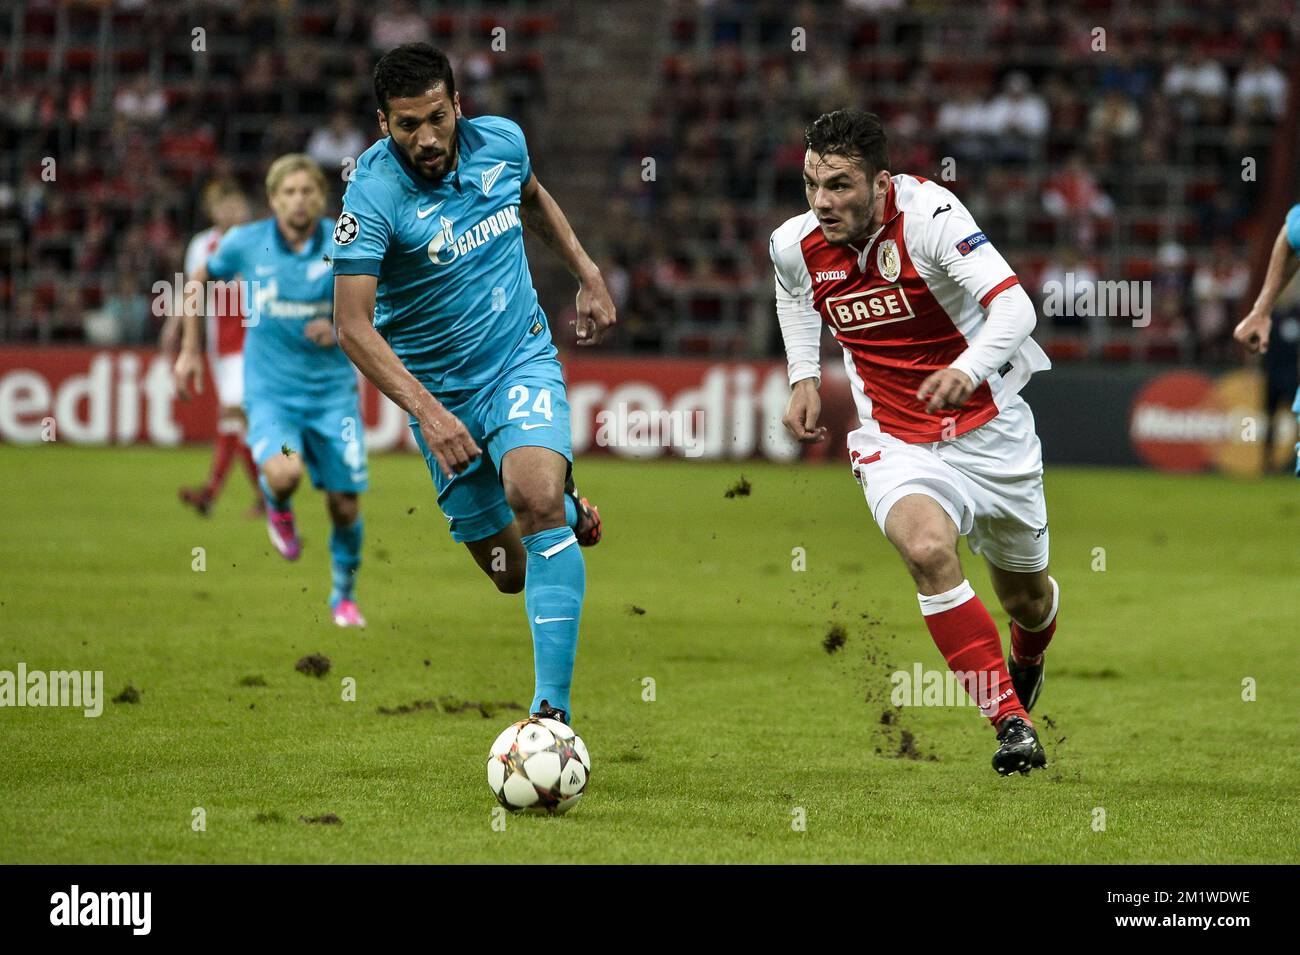 Zenit's Ezequiel Garay and Standard's Anthony Tony Watt pictured during the first leg match between Belgian first division soccer team Standard de Liege and Russian team FC Zenit Saint Petersburg in the playoffs for the UEFA Champions League competition, Wednesday 20 August 2014, in Liege. Stock Photo